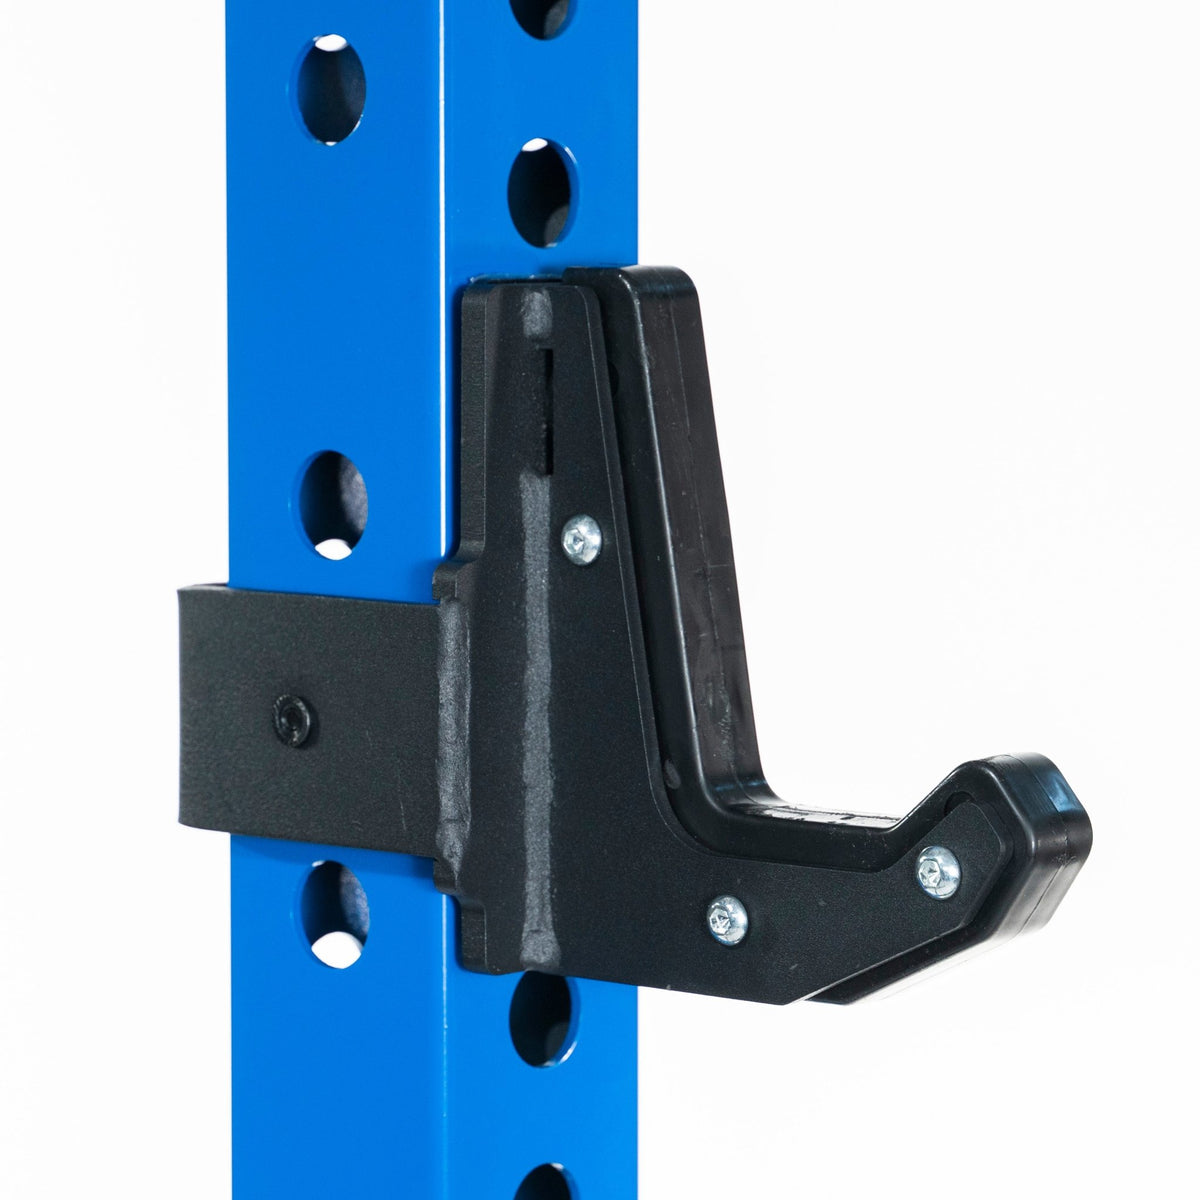 FitWay Equip. Half Rack with Spotter Arms - Fitness Experience